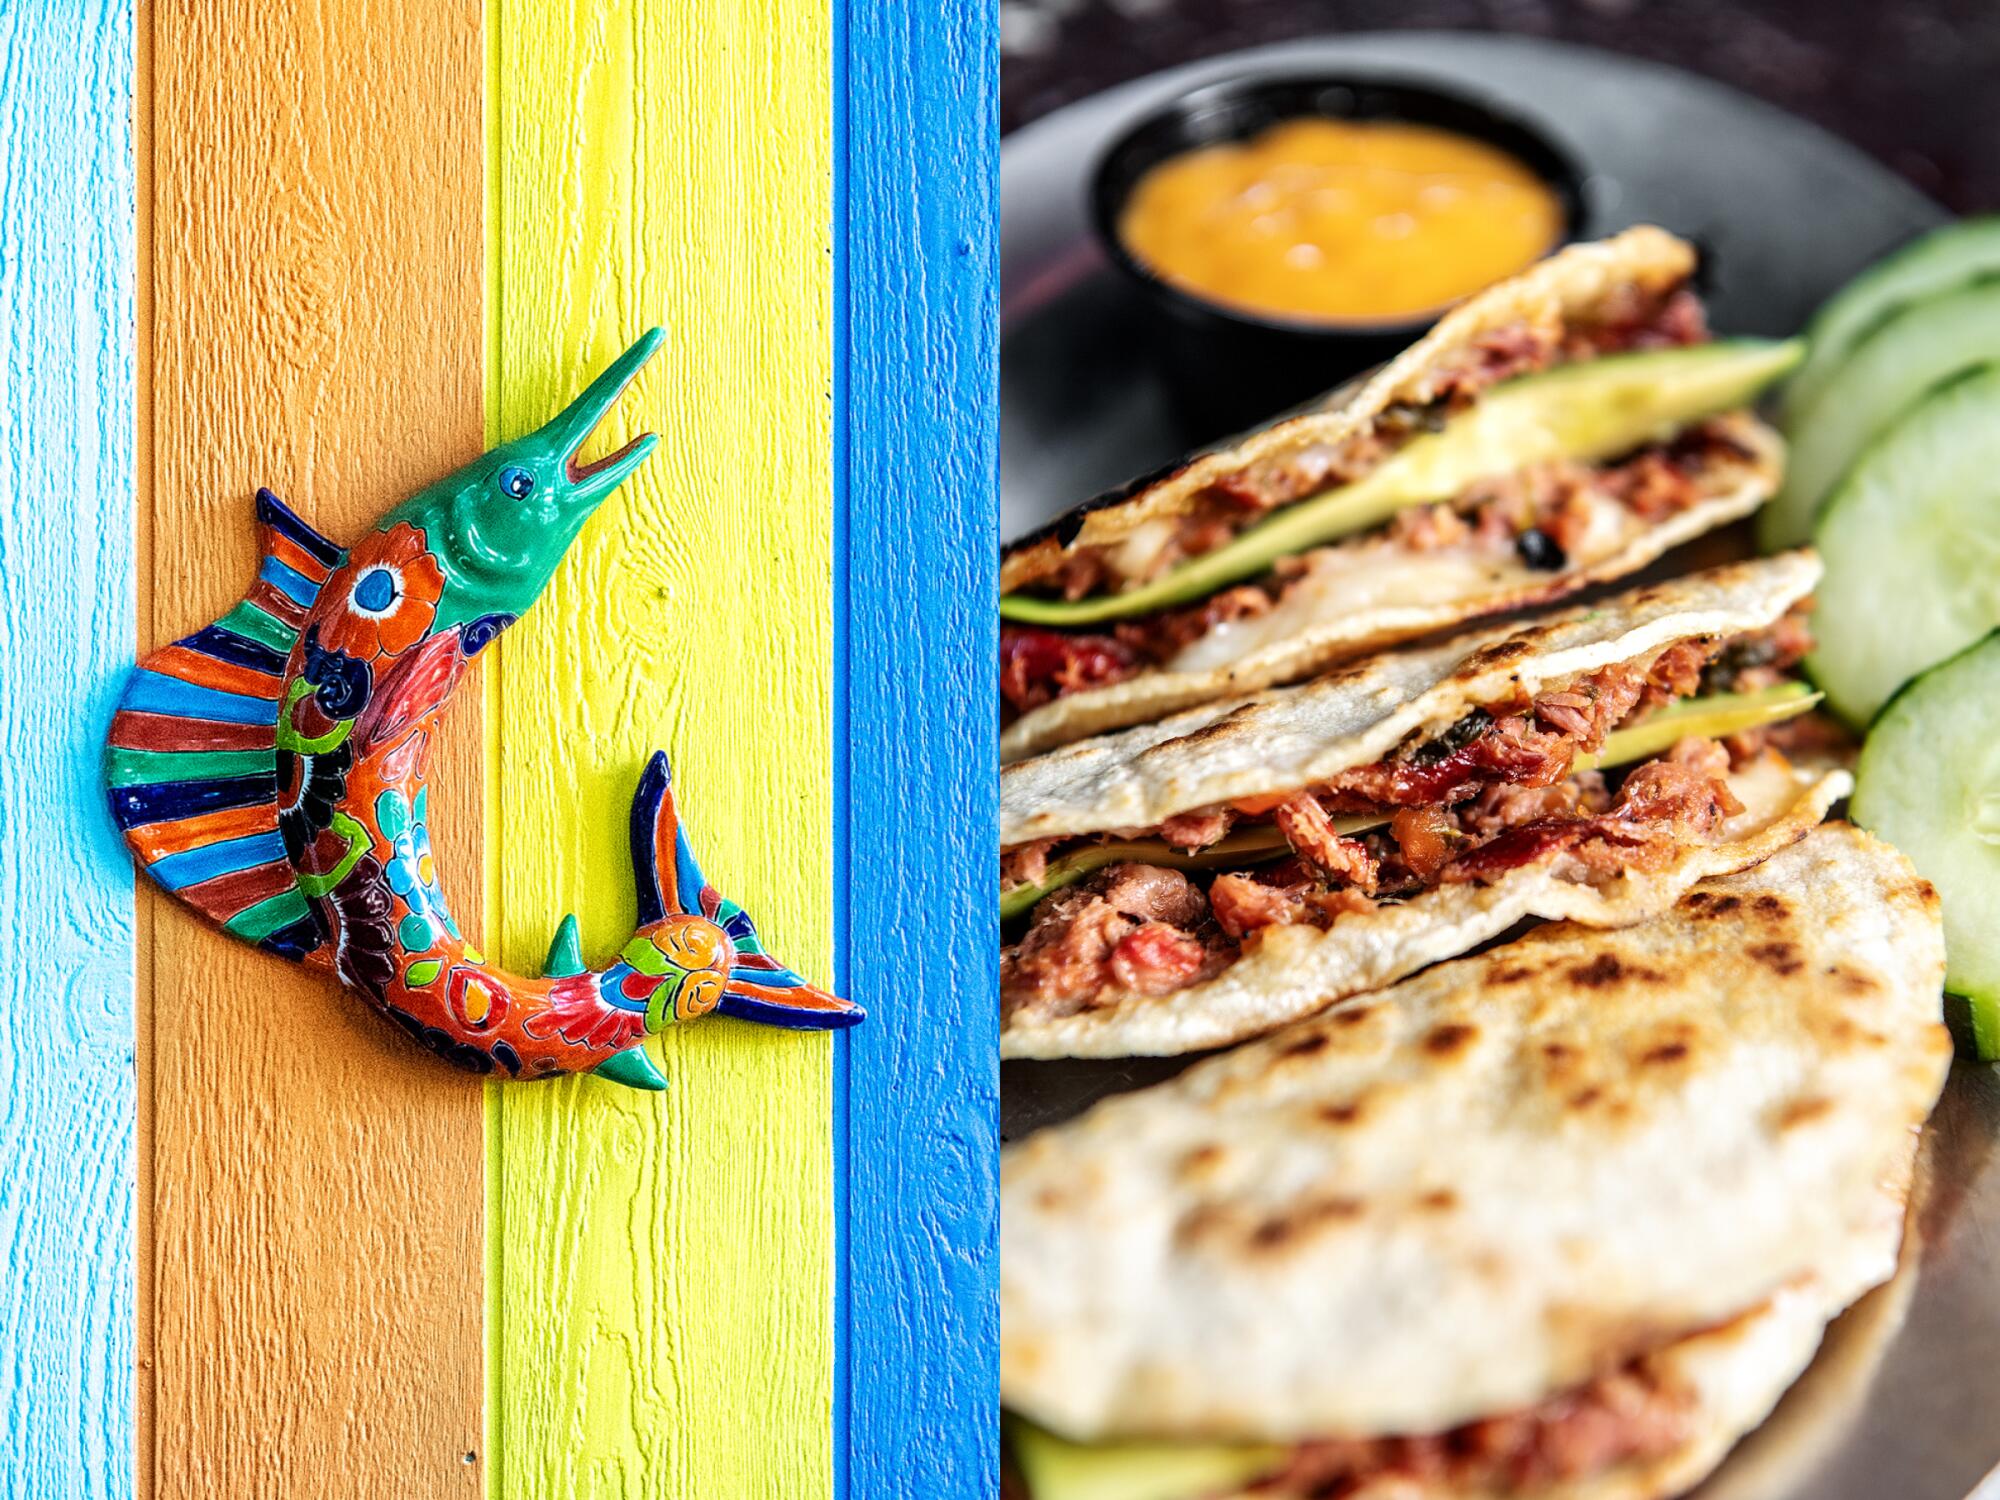 Left: A colorful decorative marlin on a wall. Right: The marlin tacos from 106 Seafood Underground.